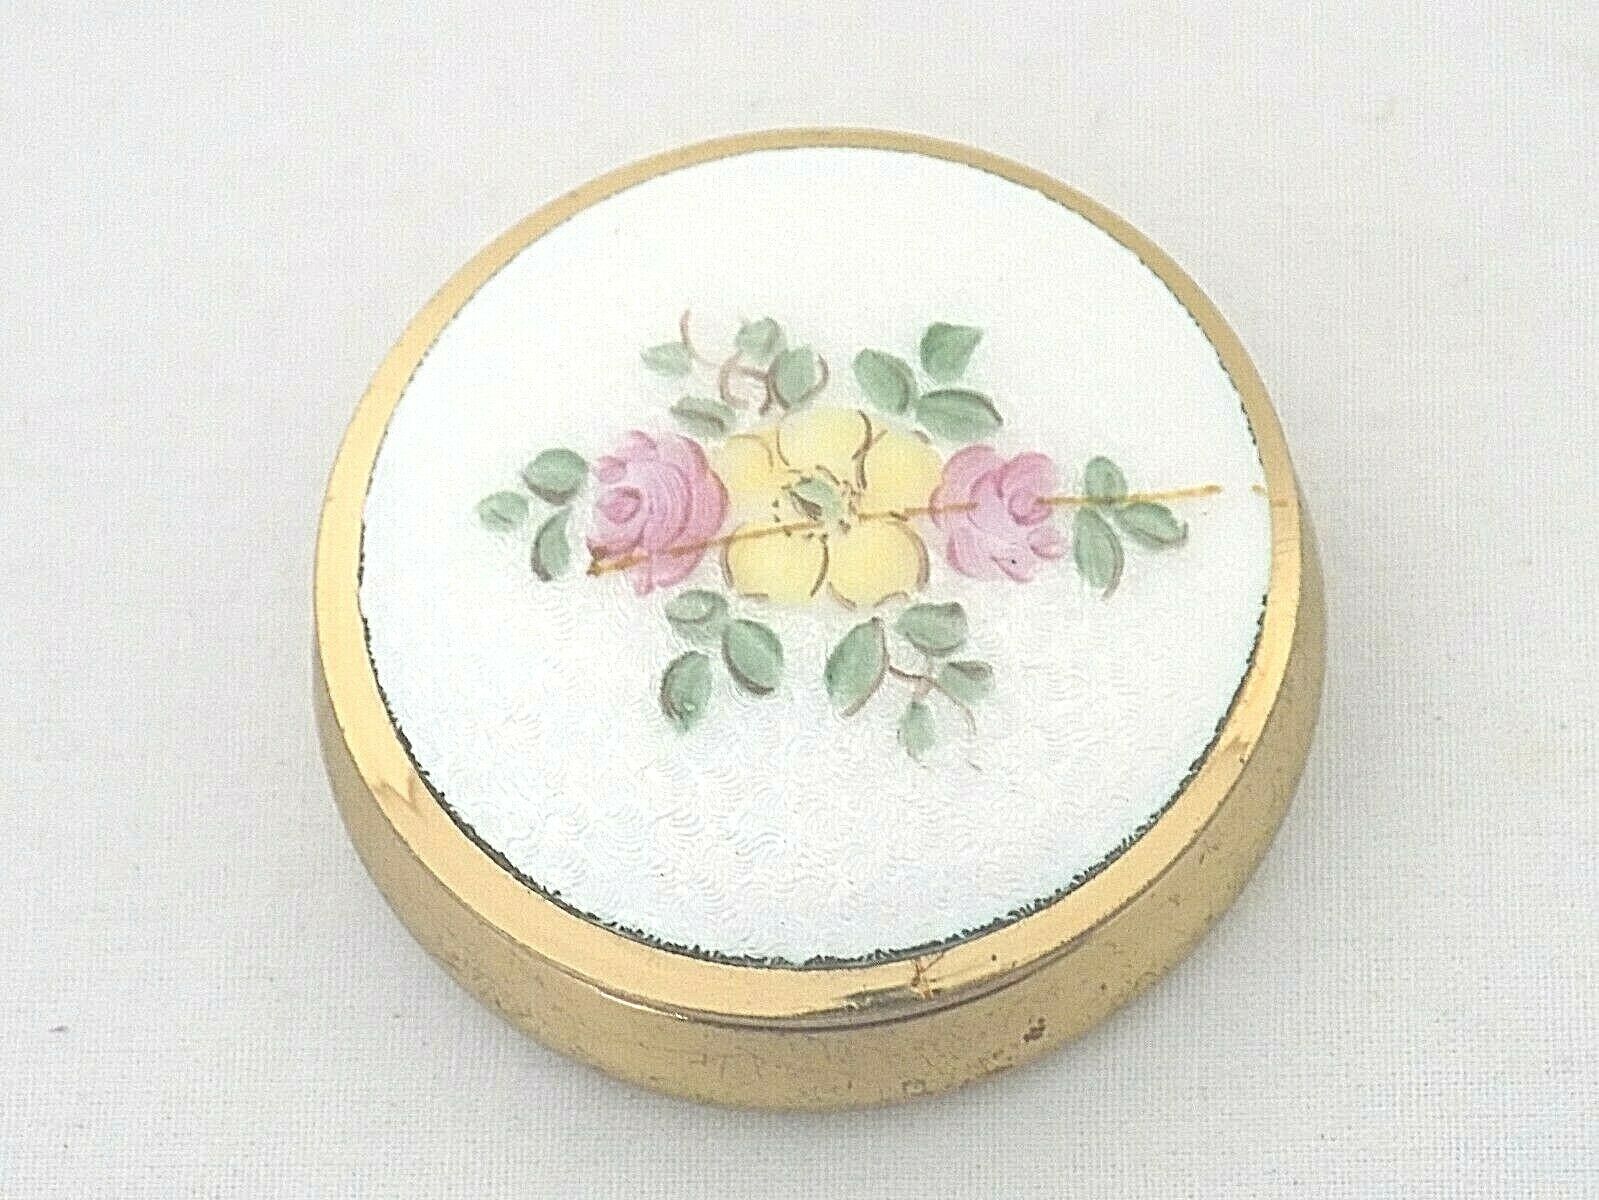 Vintage 1920's-30's Guilloche Enamel Floral Design & Hinged Brass Pill Box